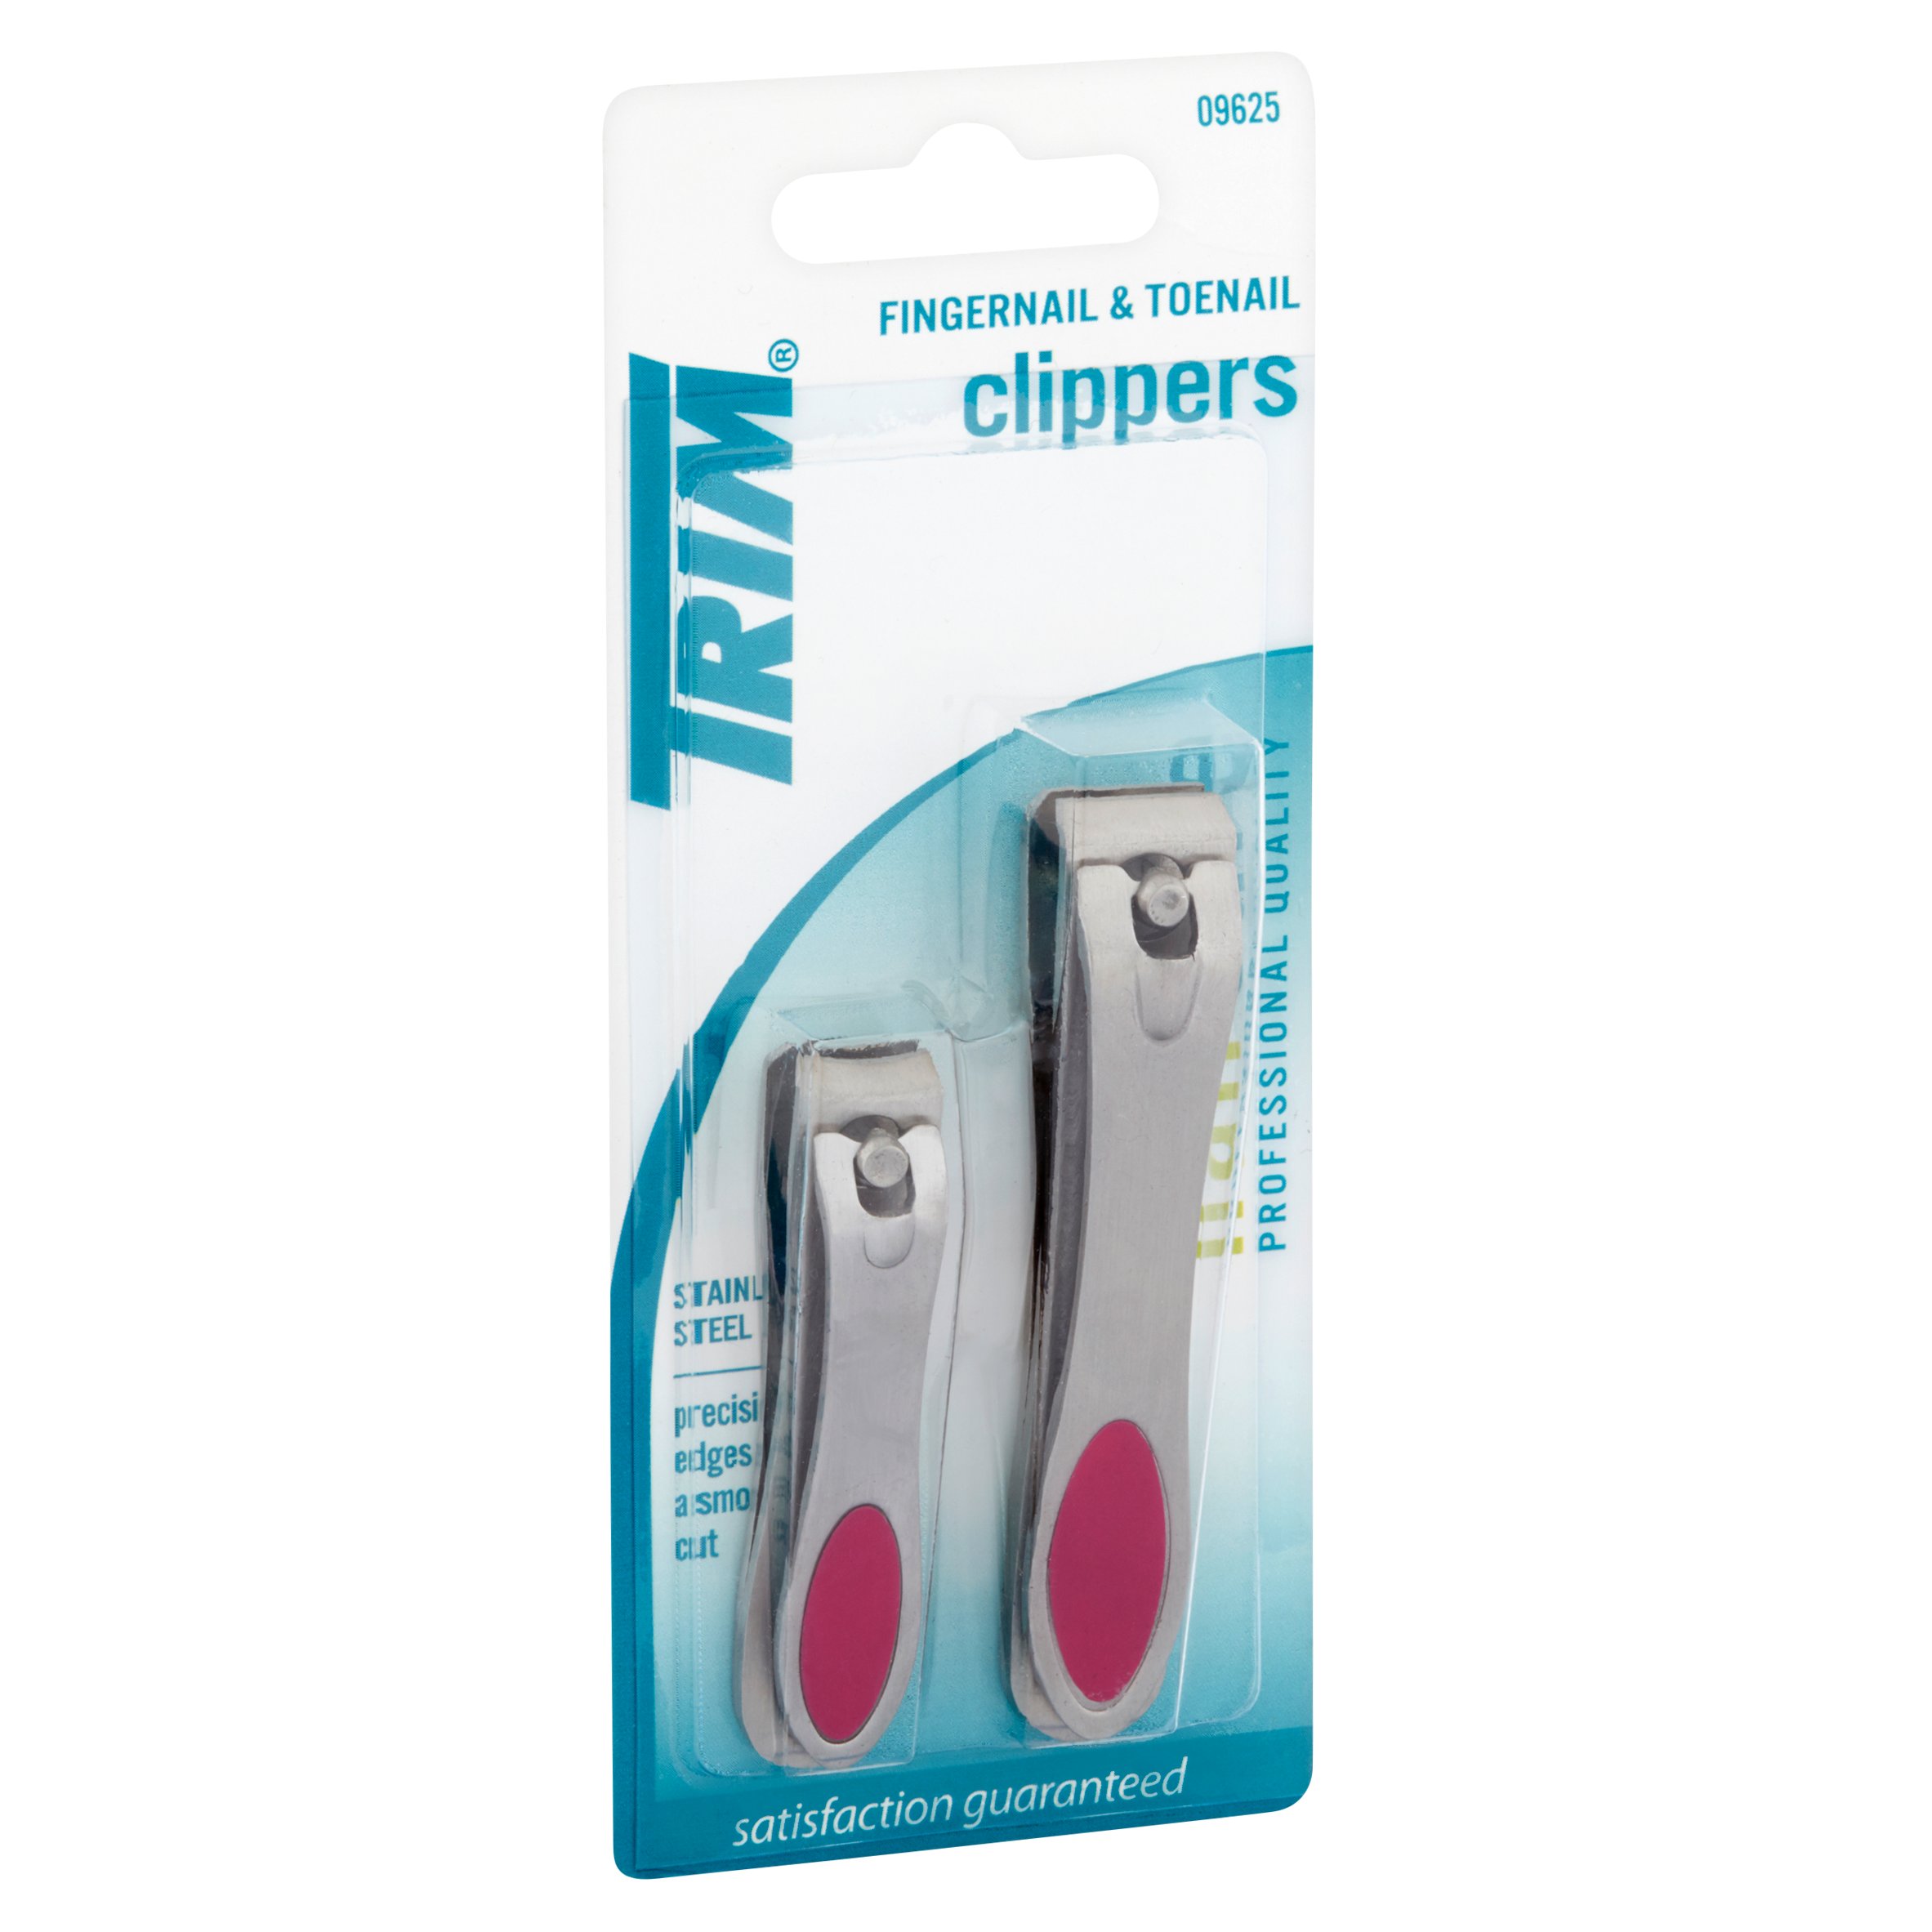 Trim Nail Care Stainless Steel Fingernail & Toenail Clippers, 2 Pieces - image 2 of 7